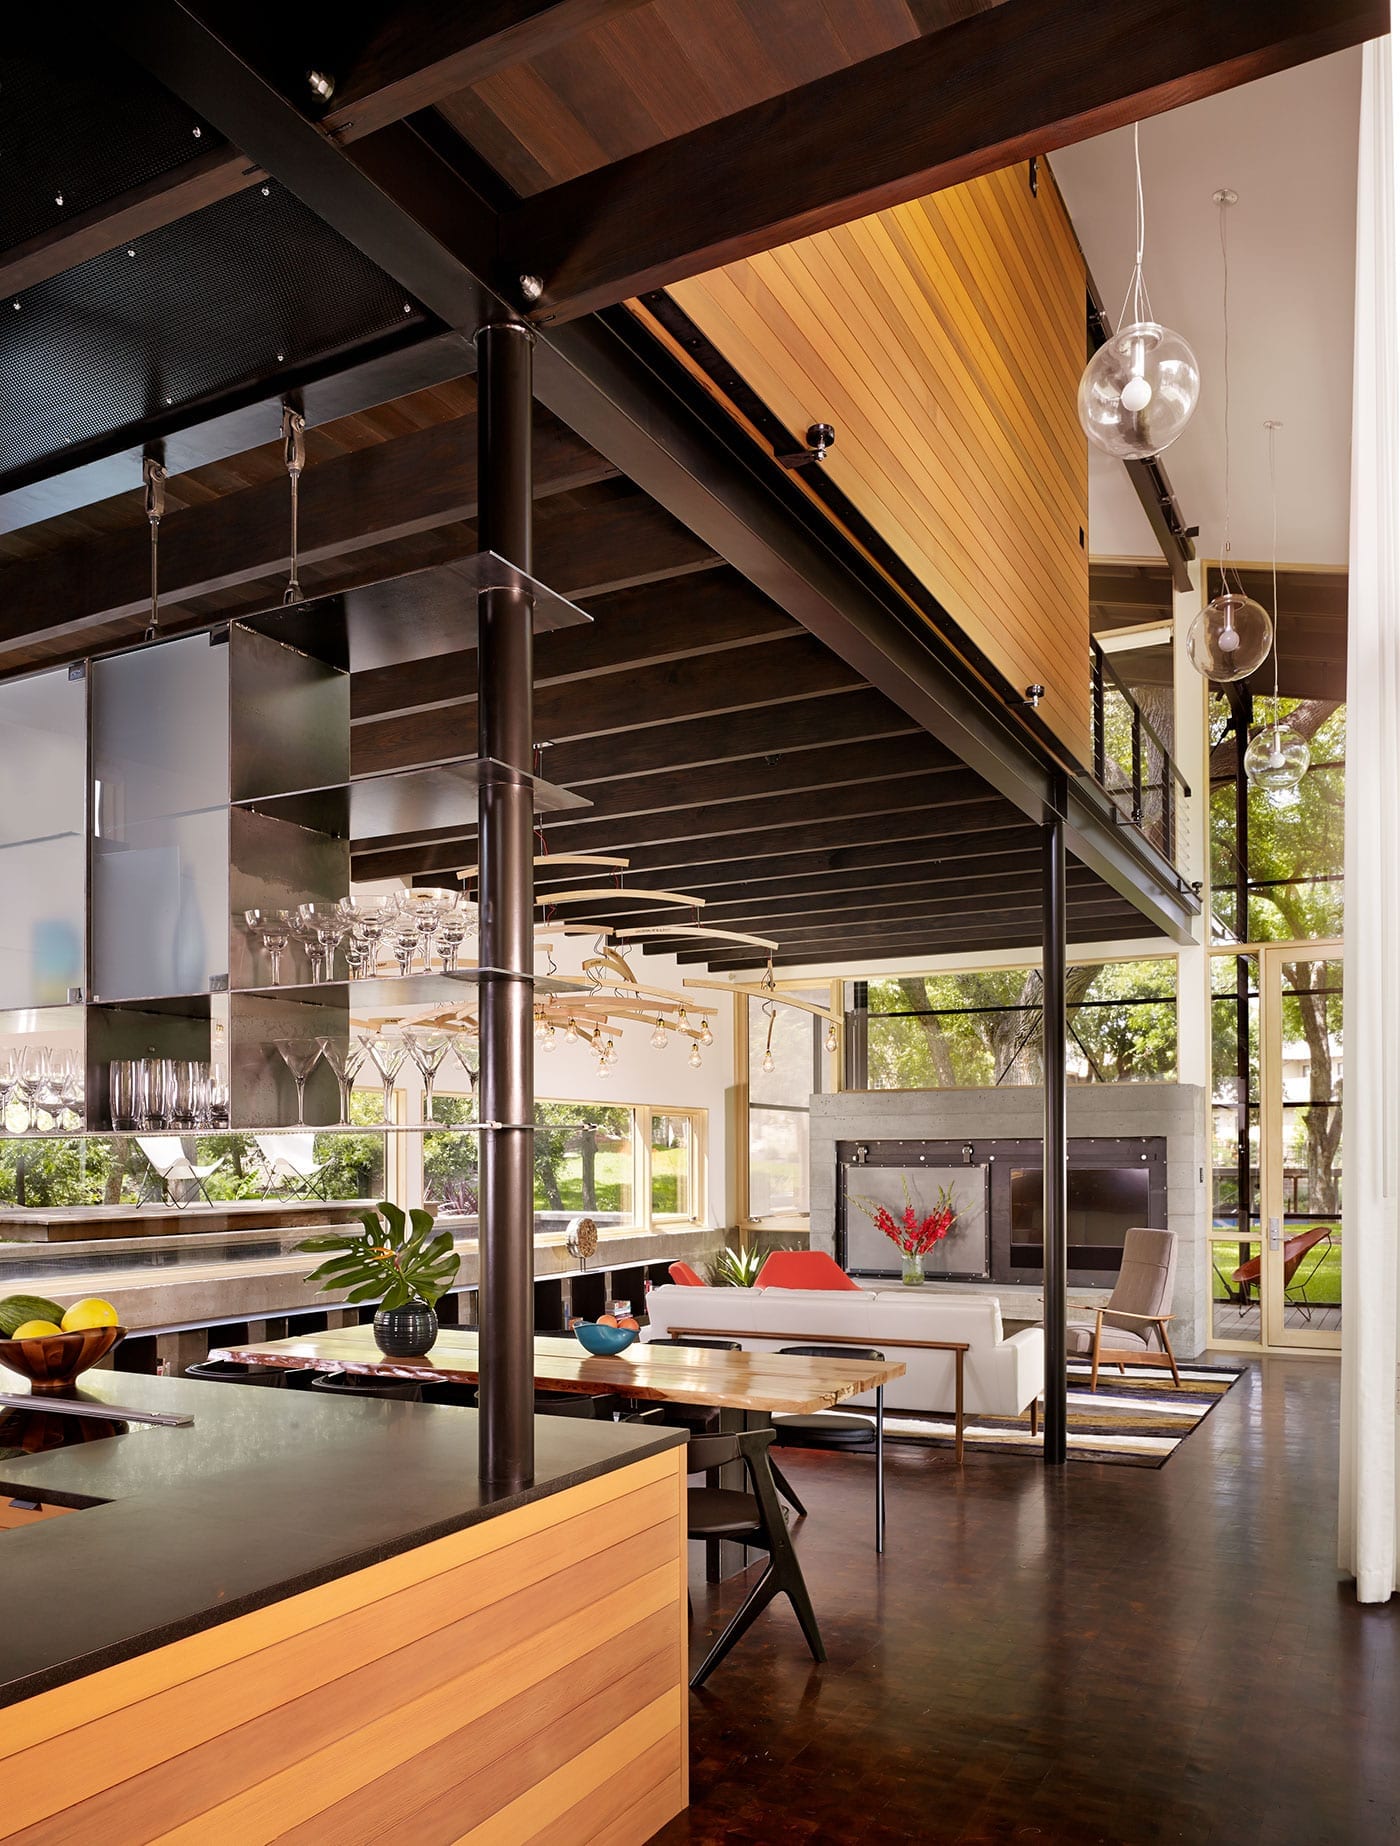 Kitchen view of modern lakefront home